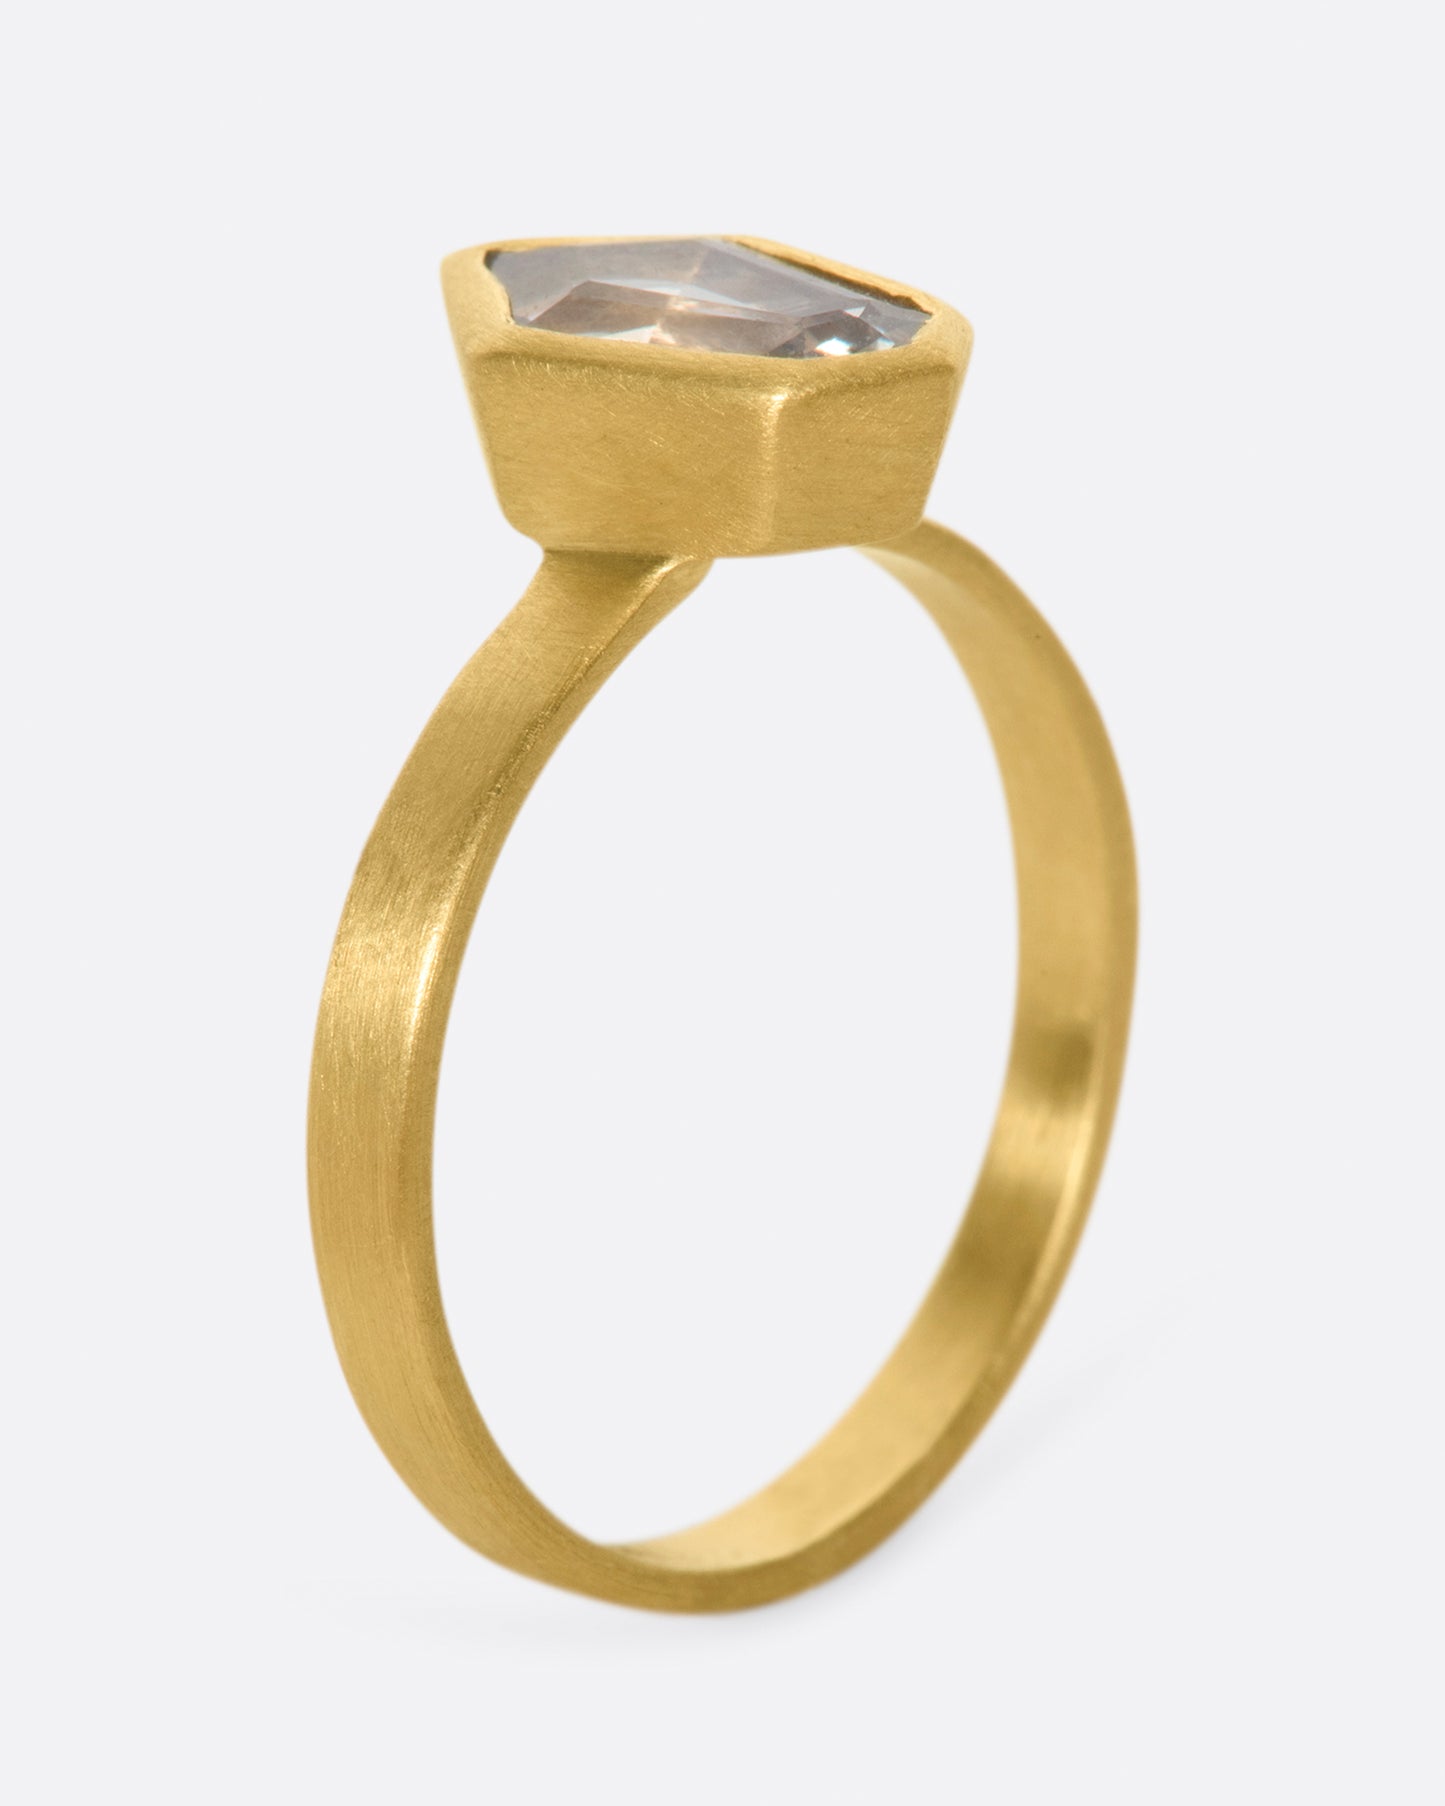 A matte gold solitaire ring with a bezel set, shield shaped sapphire.